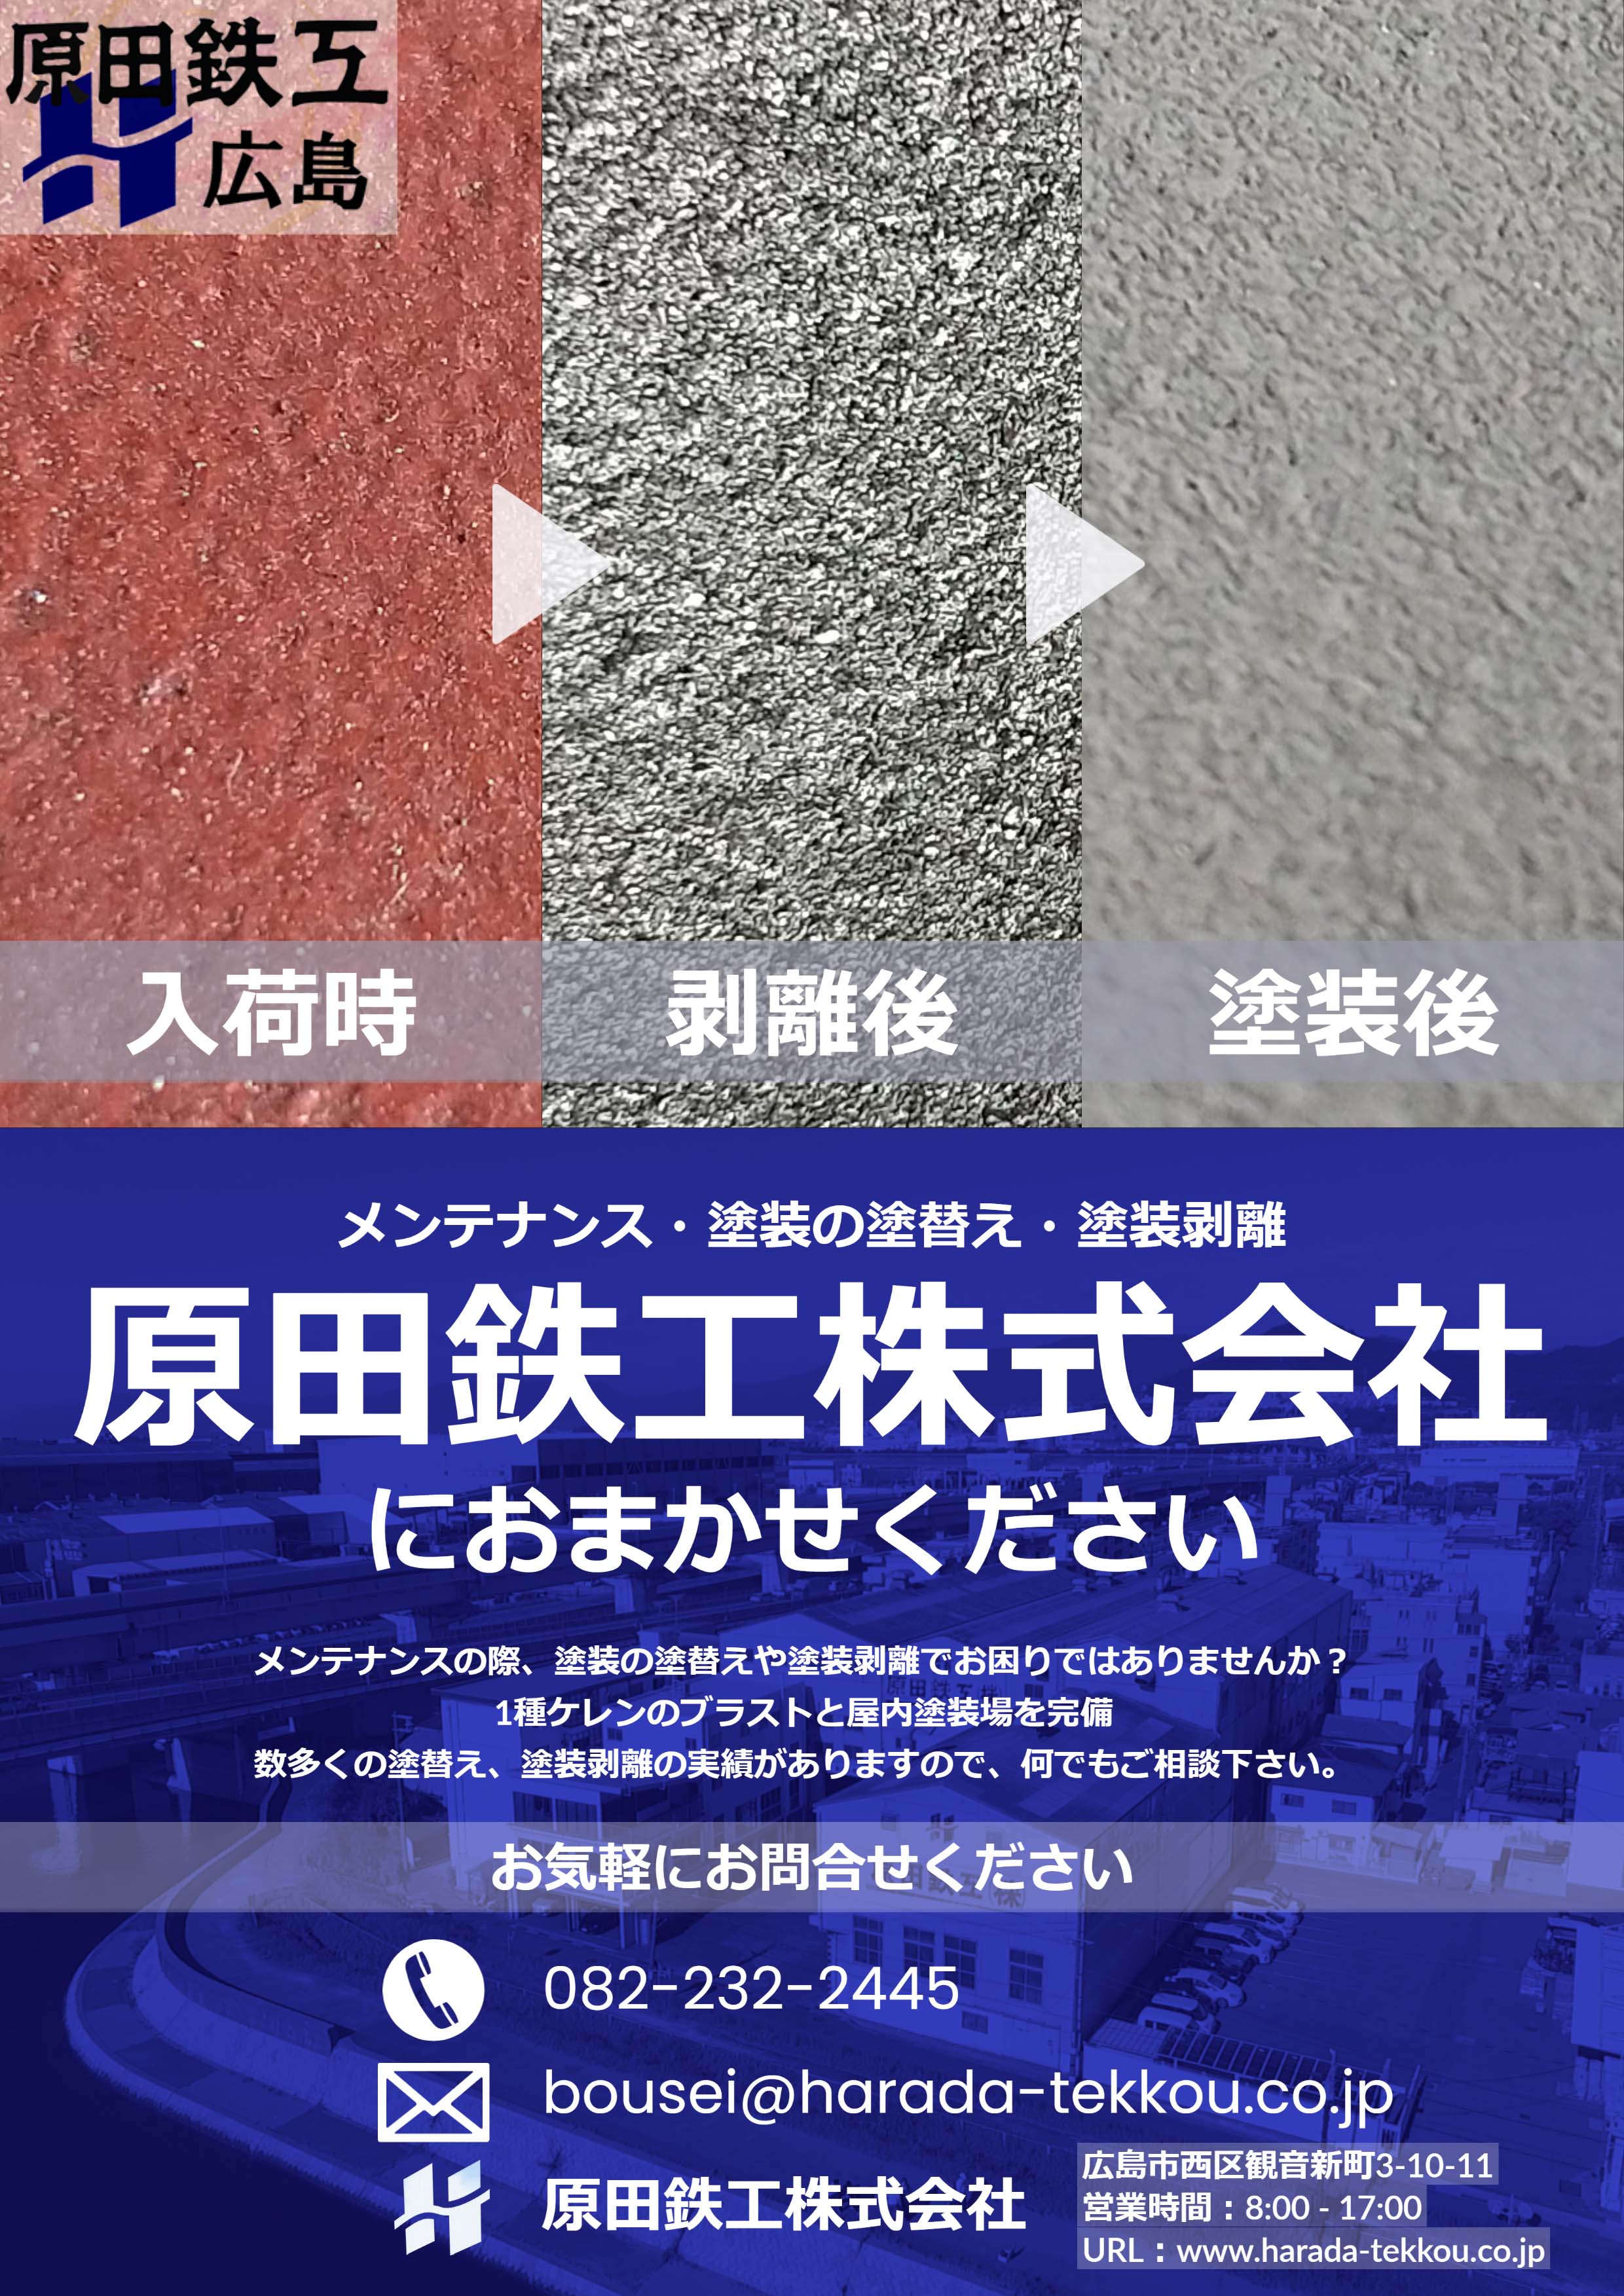 https://stratus.campaign-image.jp/images/5590000000151881_zc_v1_1701341065705_塗膜の寿命に及ぼす影響.png